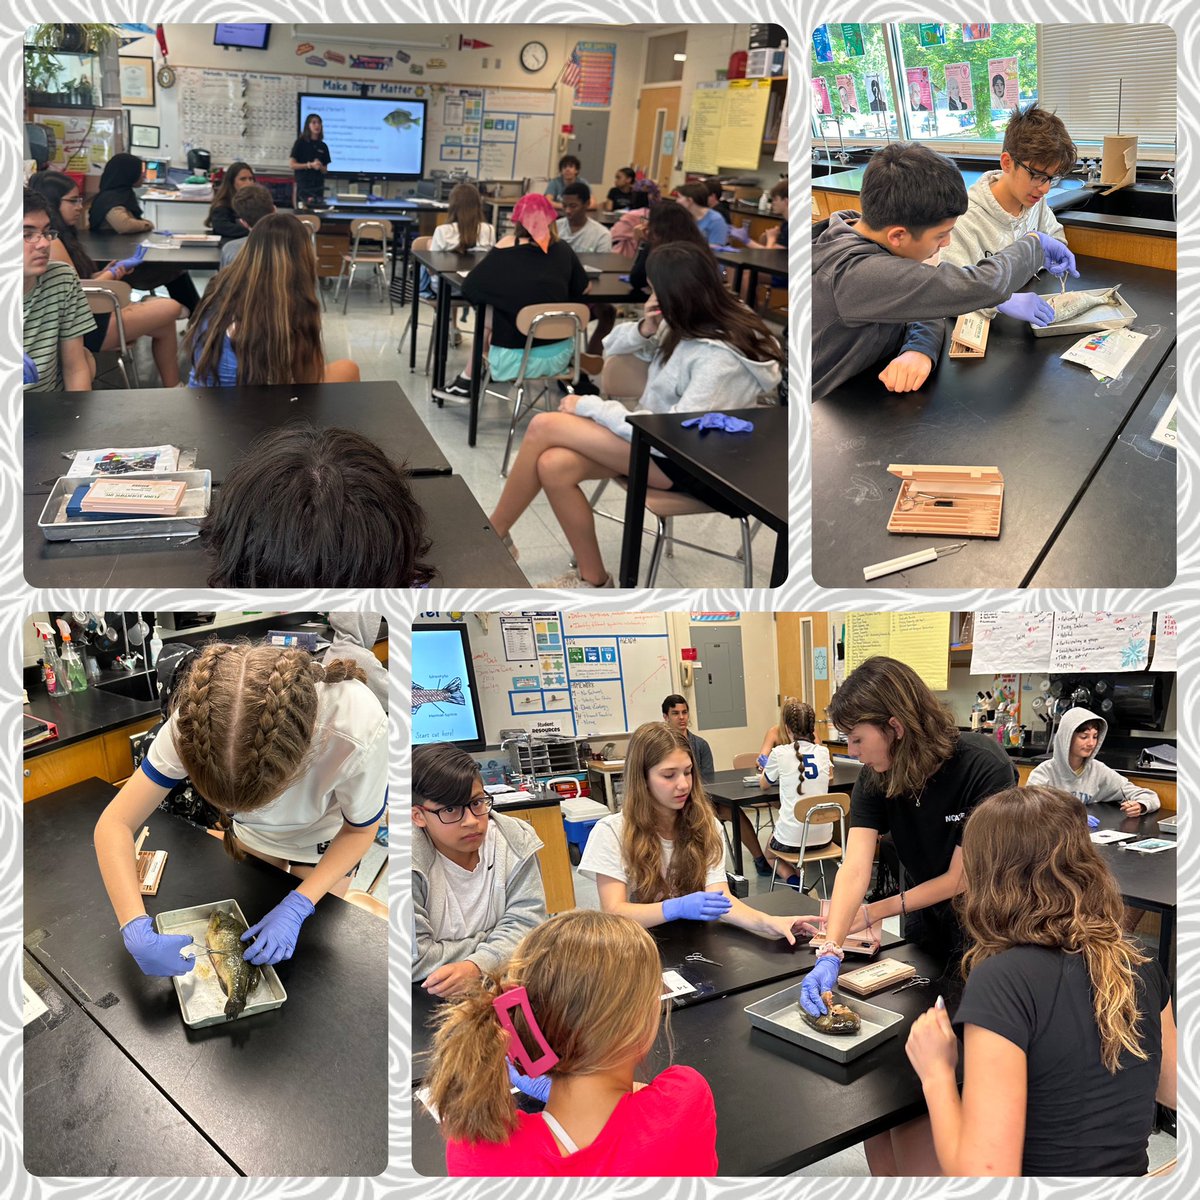 There’s nothing fishy about these 8th grade scientists! Fish dissection in action: comparing anatomies of fish and other vertebrates. #LifeBelowWater #SDG14 @GlobalGoalsUN @kerritraynor @Global_WCPSS @ScienceWCPSS @CGHahner